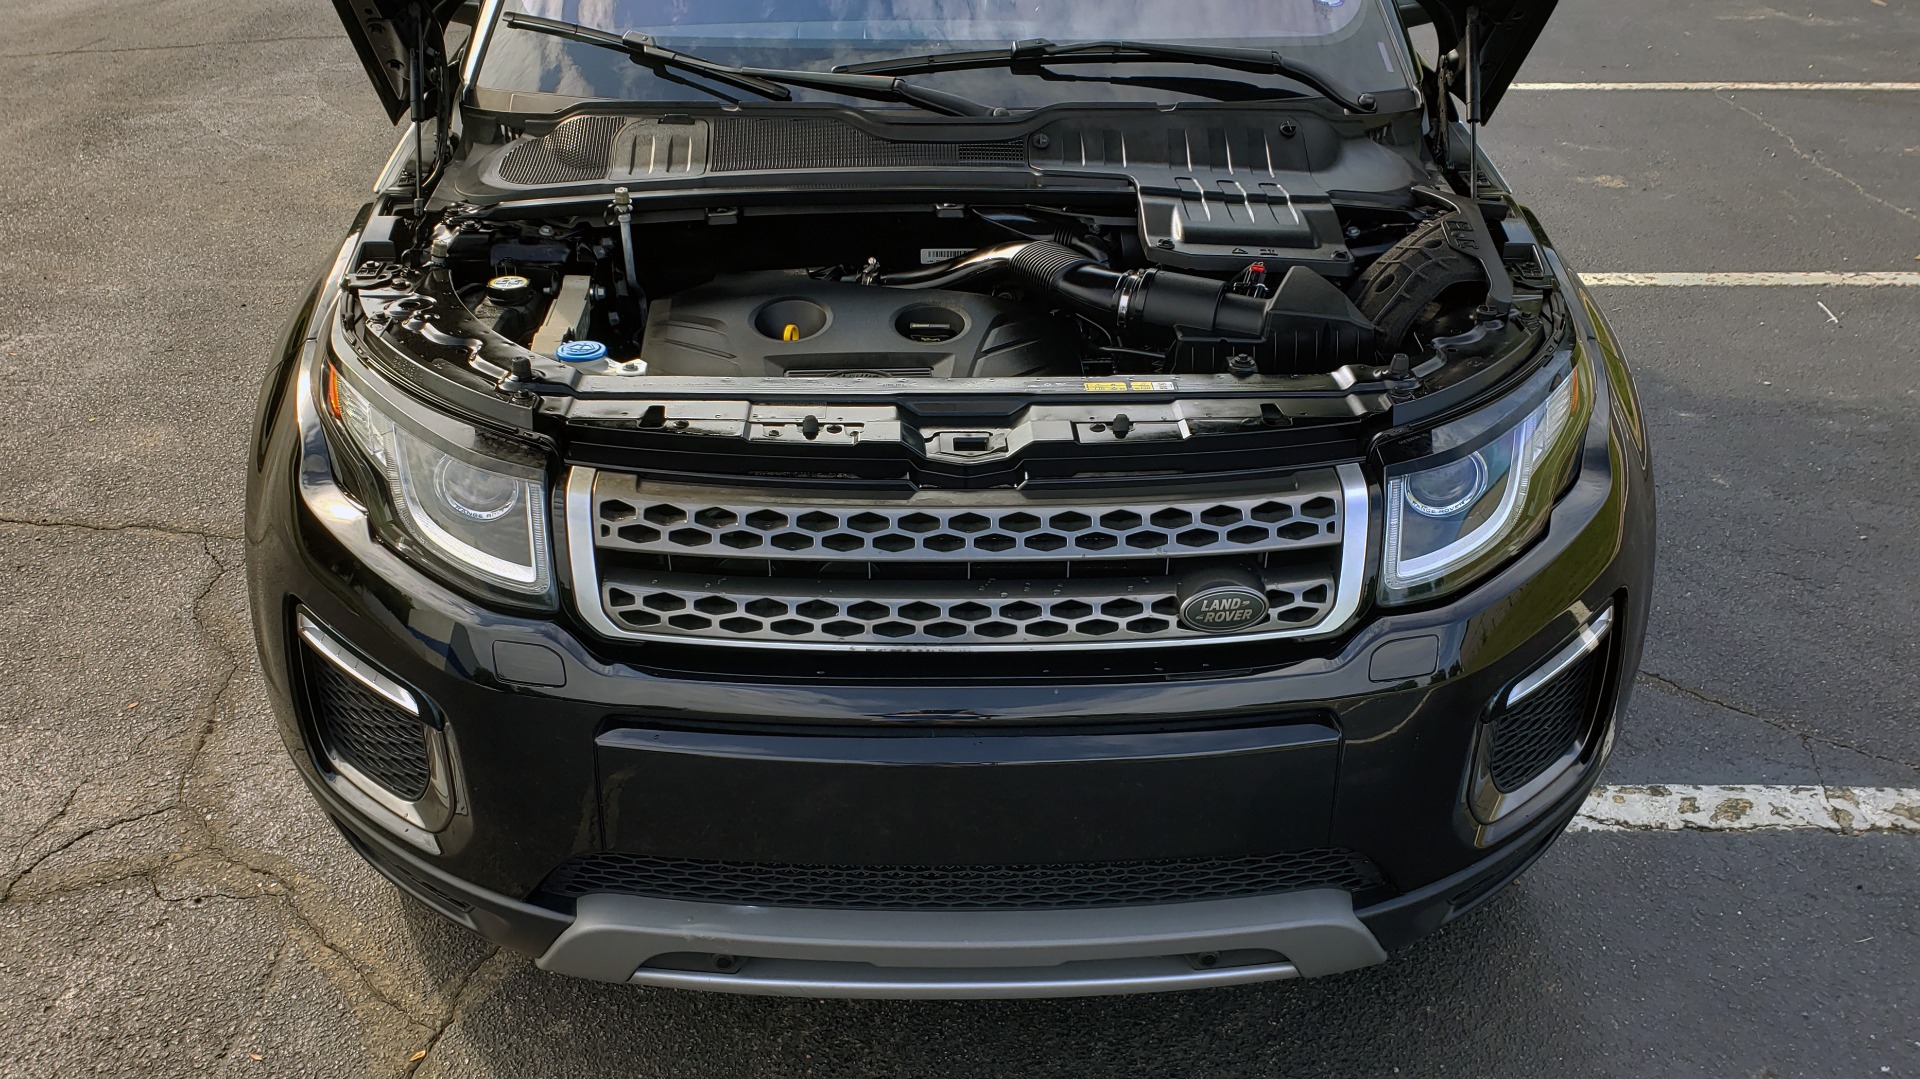 Used 2016 Land Rover RANGE ROVER EVOQUE HSE / AWD / NAV / MERIDIAN / PANO-ROOF / REARVIEW for sale Sold at Formula Imports in Charlotte NC 28227 10